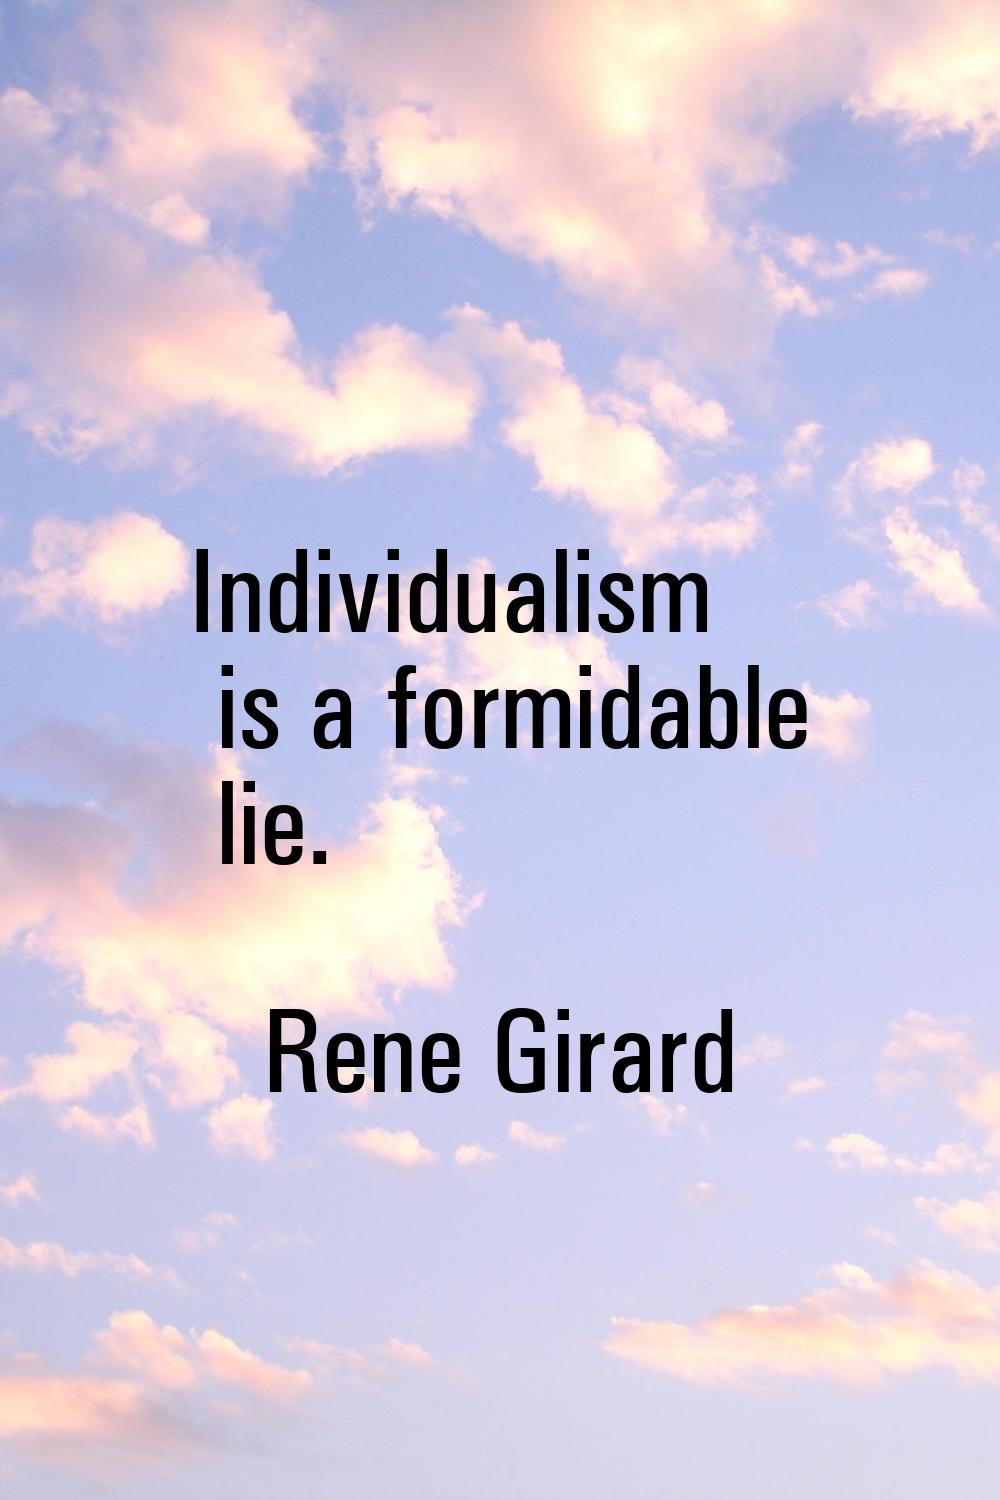 Individualism is a formidable lie.